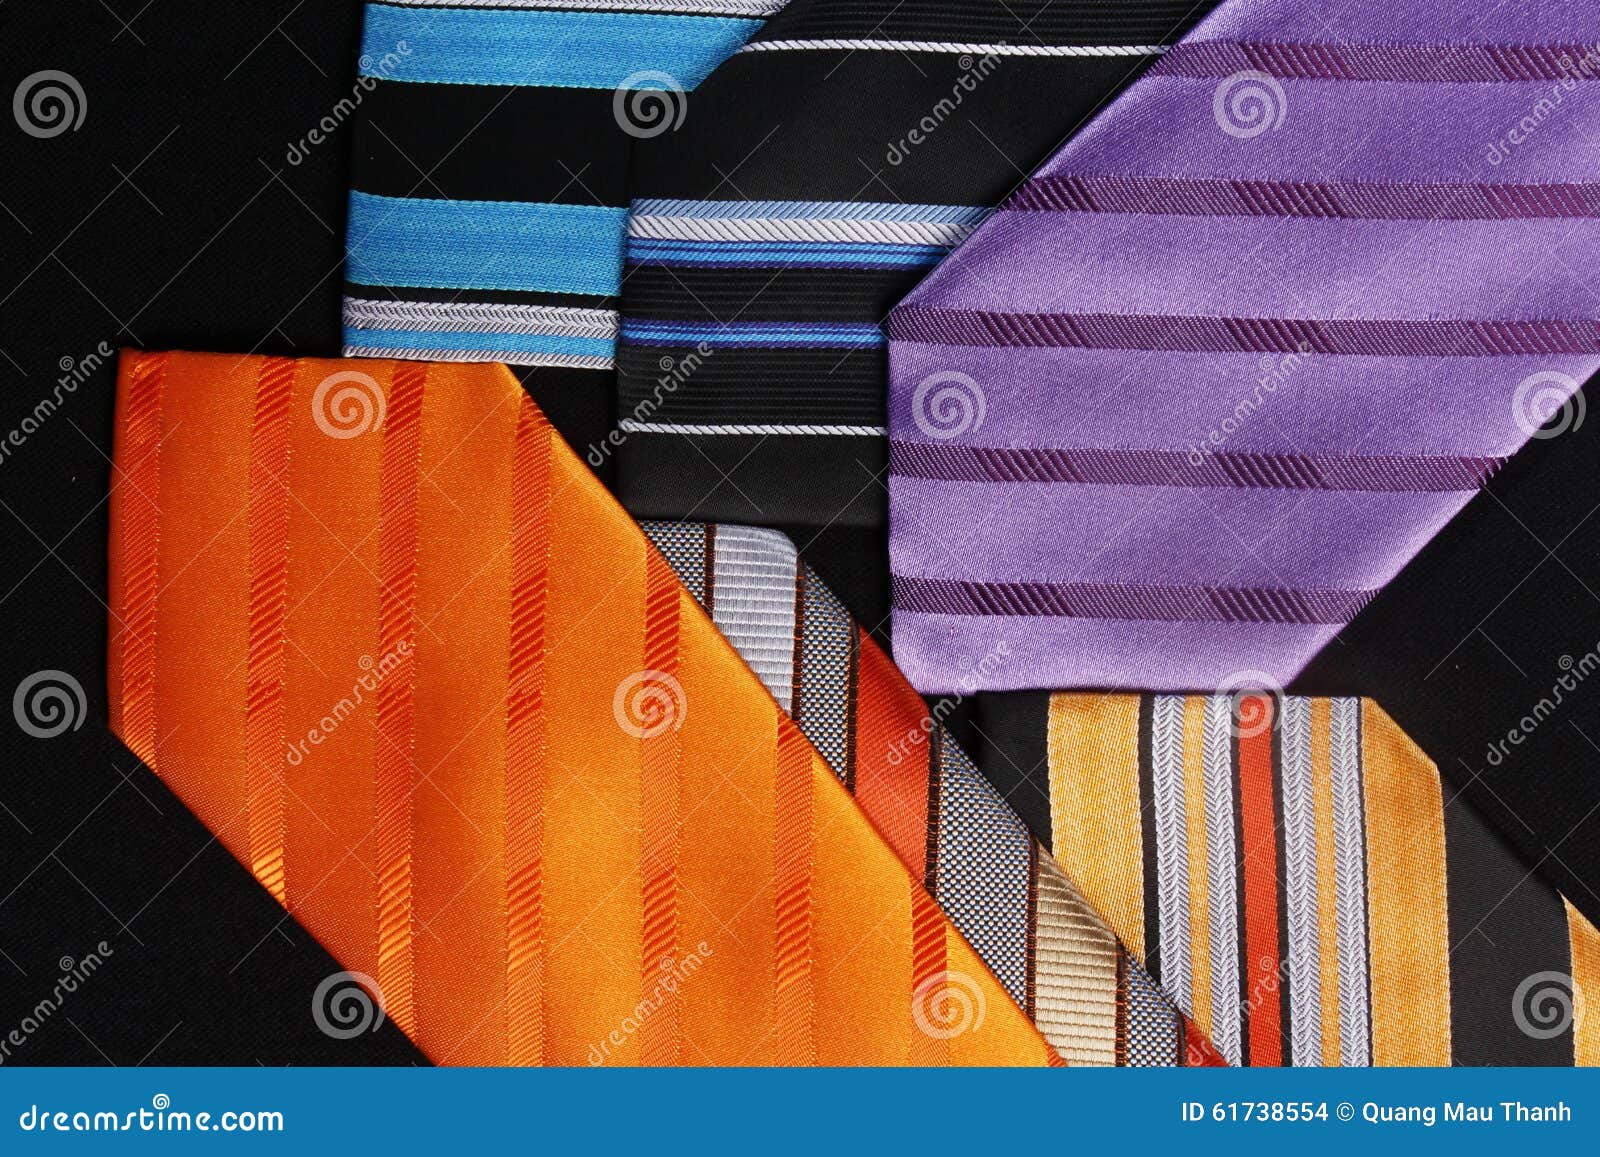 Three colorful ties stock photo. Image of style, back - 61738554